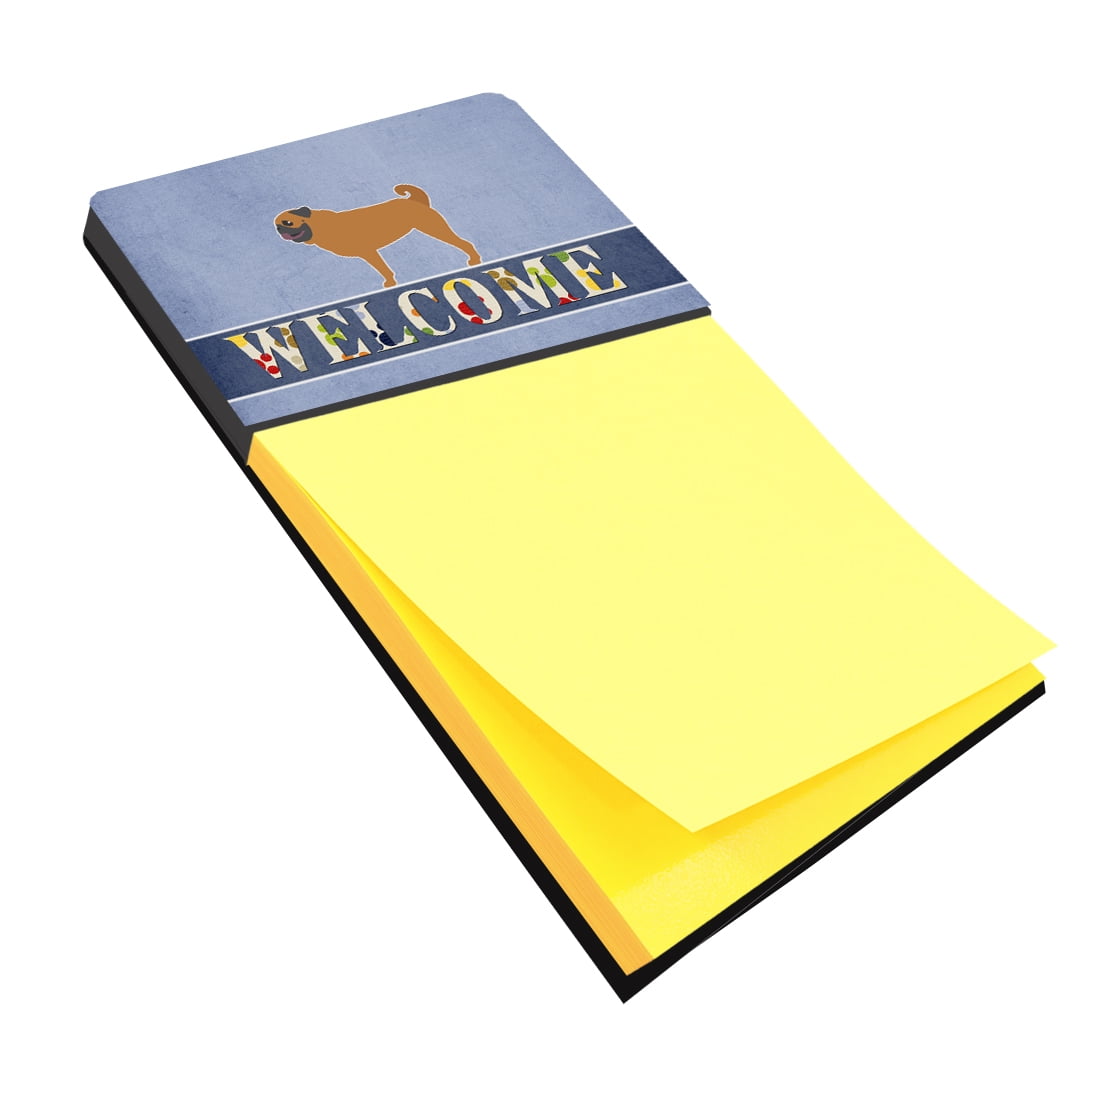 Bb5551sn Pug Welcome Sticky Note Holder